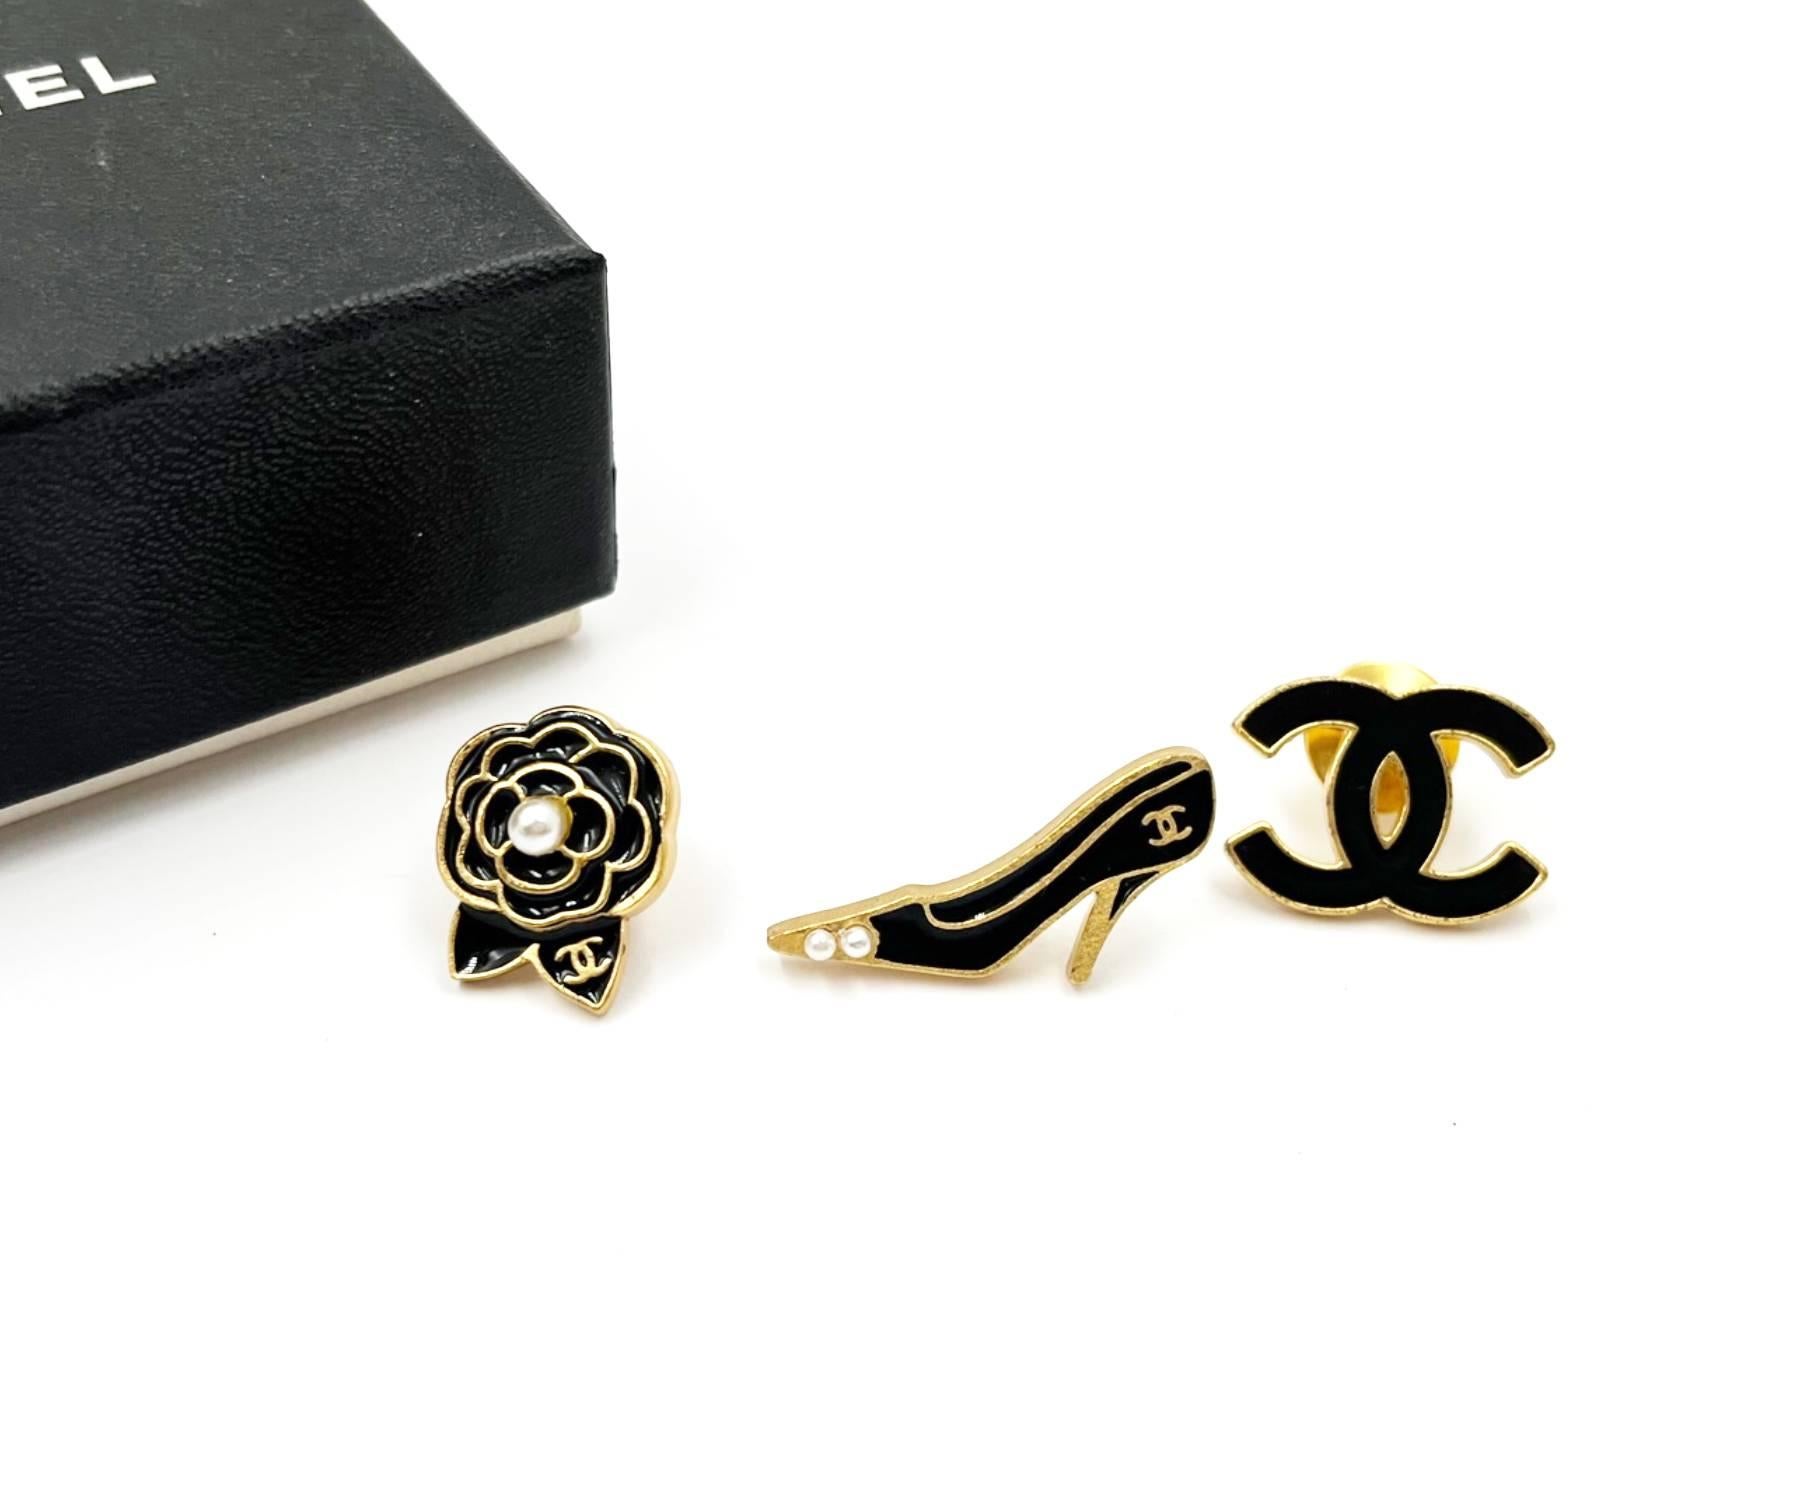 Chanel Vintage Gold Plated Black CC Heel Camellia Pins

*Marked 02
*Made in France
*Comes with the original box

-Approximately 0.75″ x 0.55″
-Very pretty
-In a pristine condition

AB3082-00253